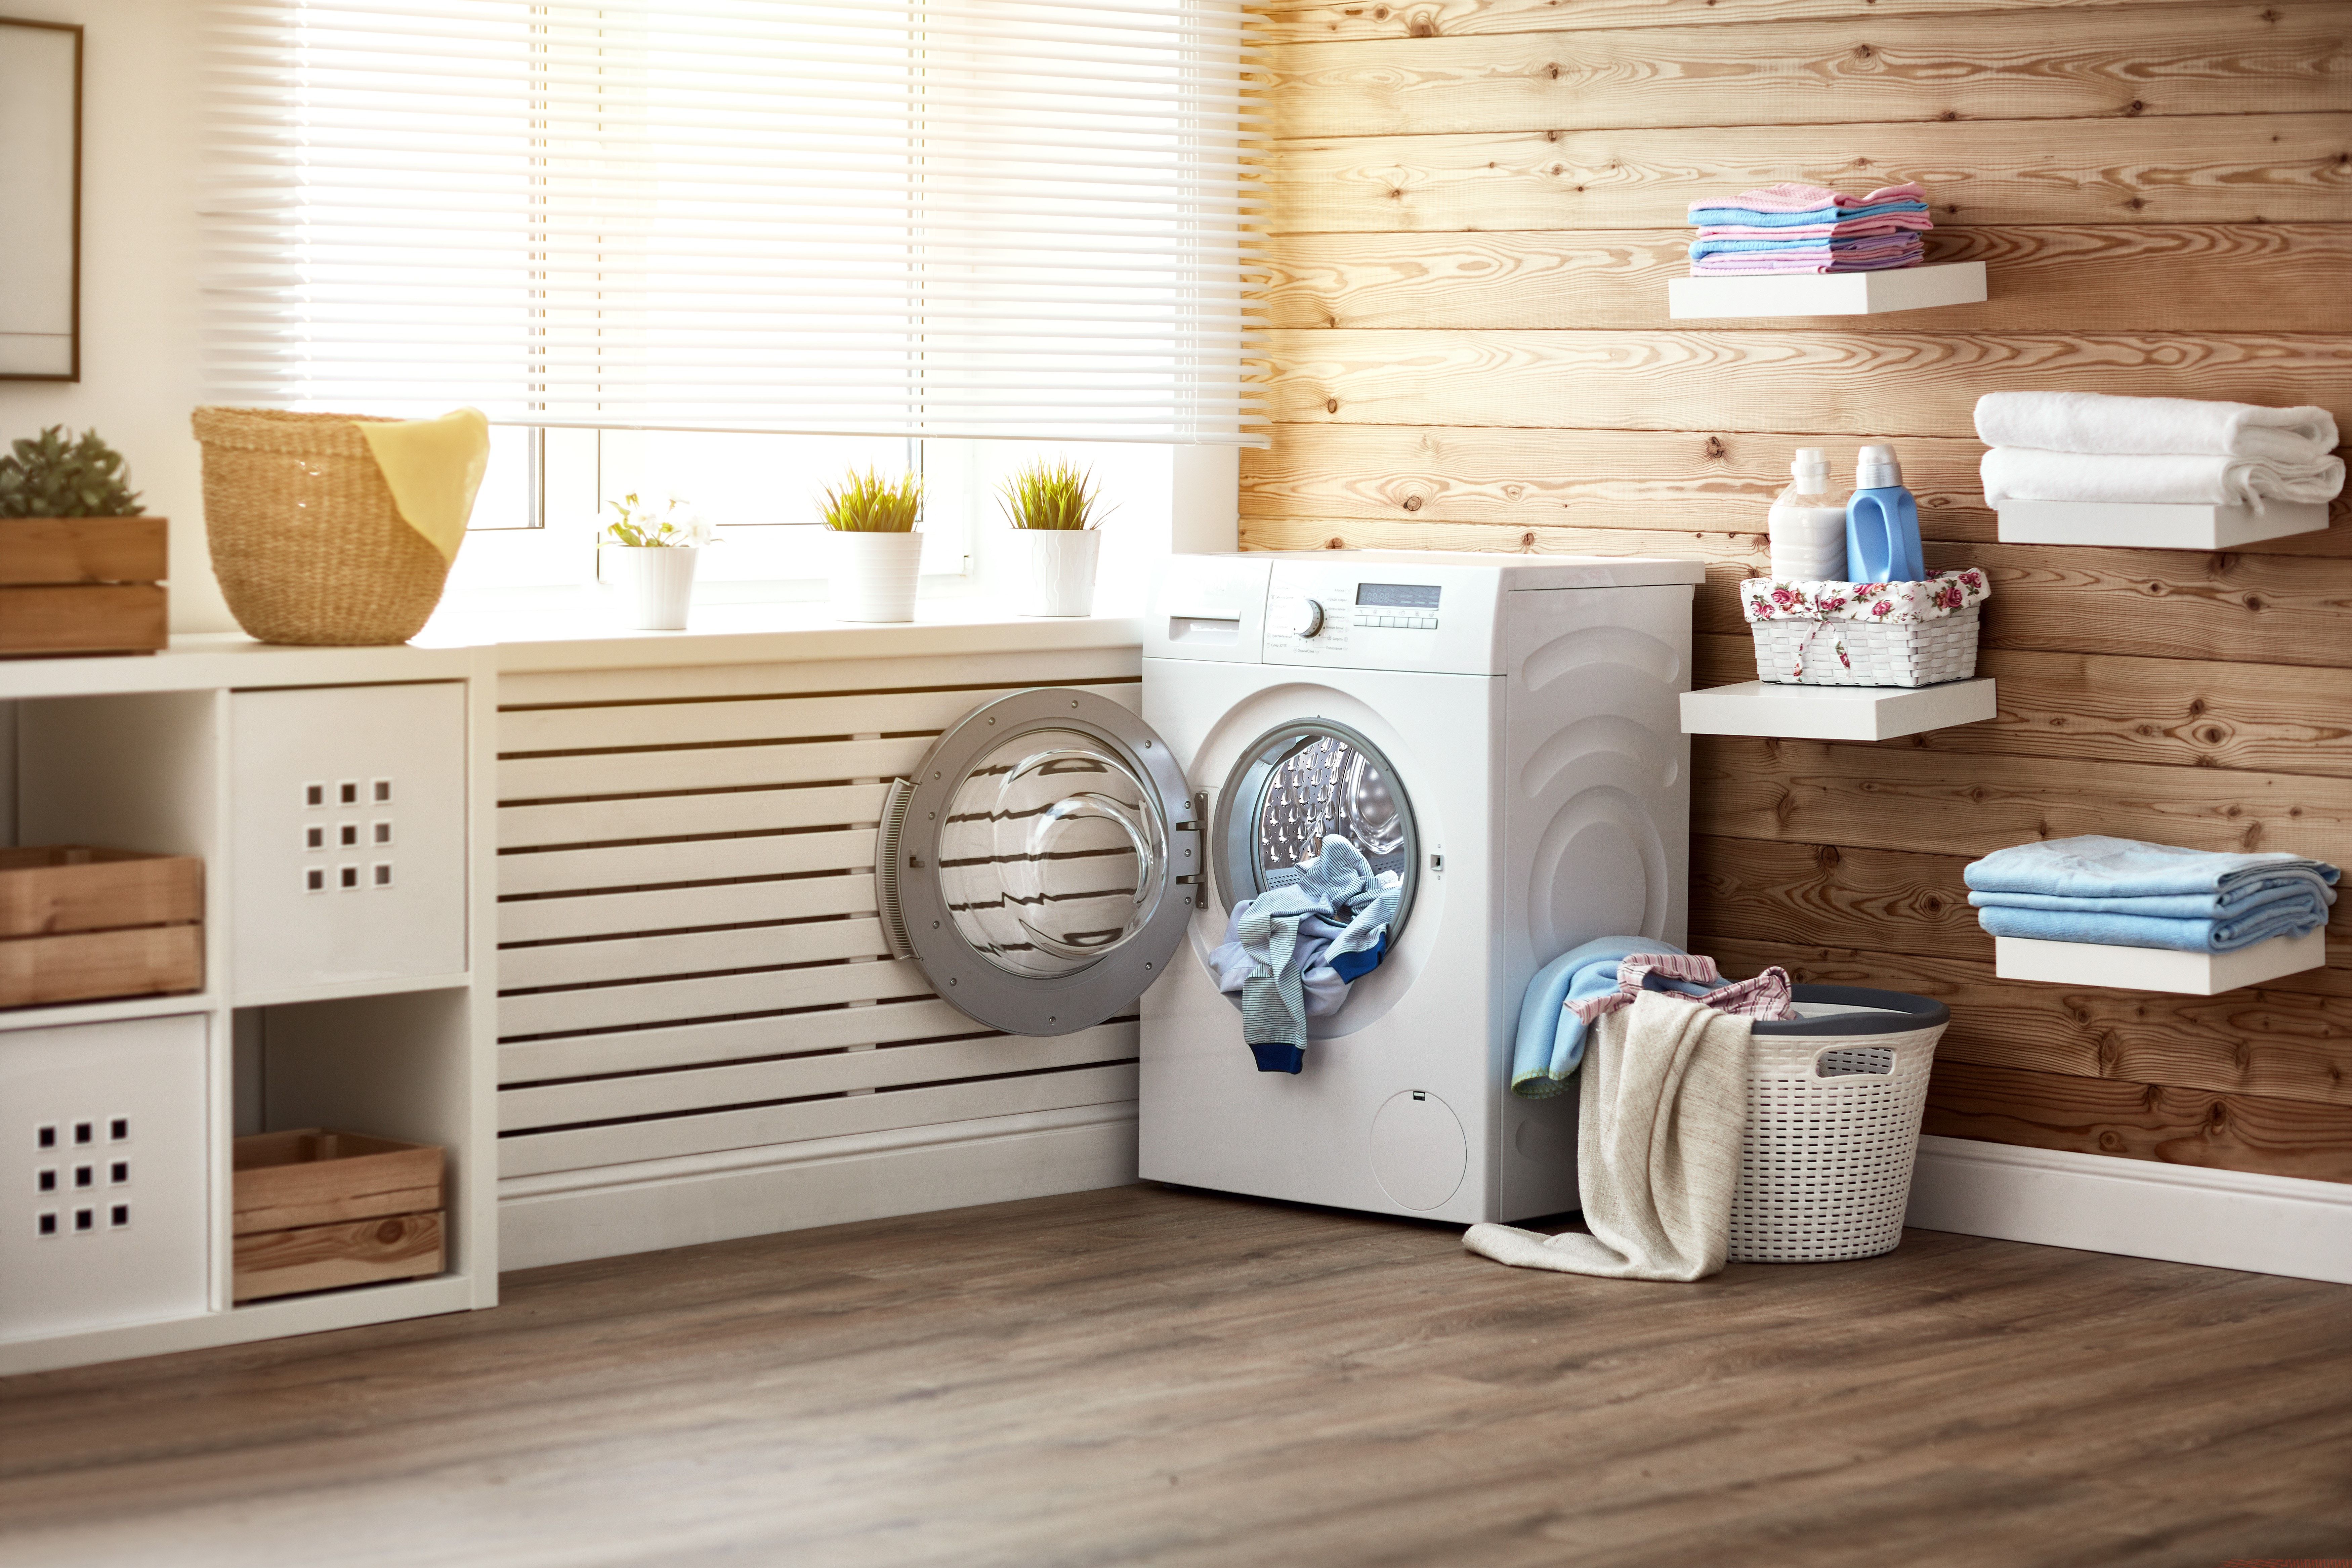 Best integrated tumble dryer - Find the lowest price on